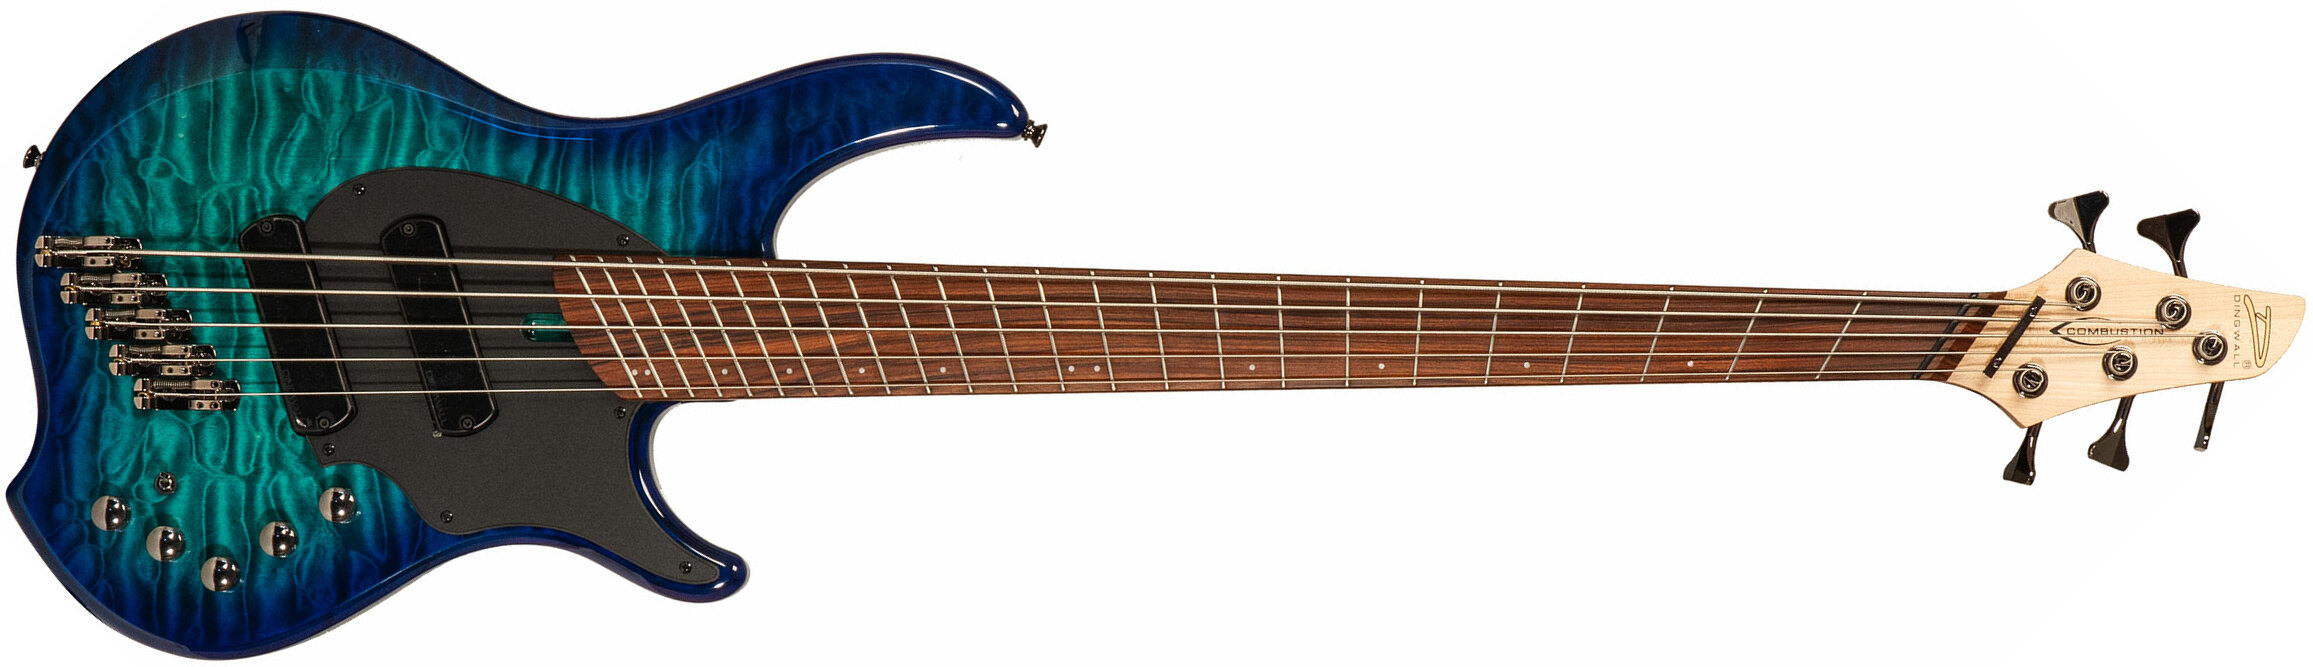 Dingwall Combustion Cb2 5c 2pu Active Pf - Whalepool Burst - Solid body electric bass - Main picture